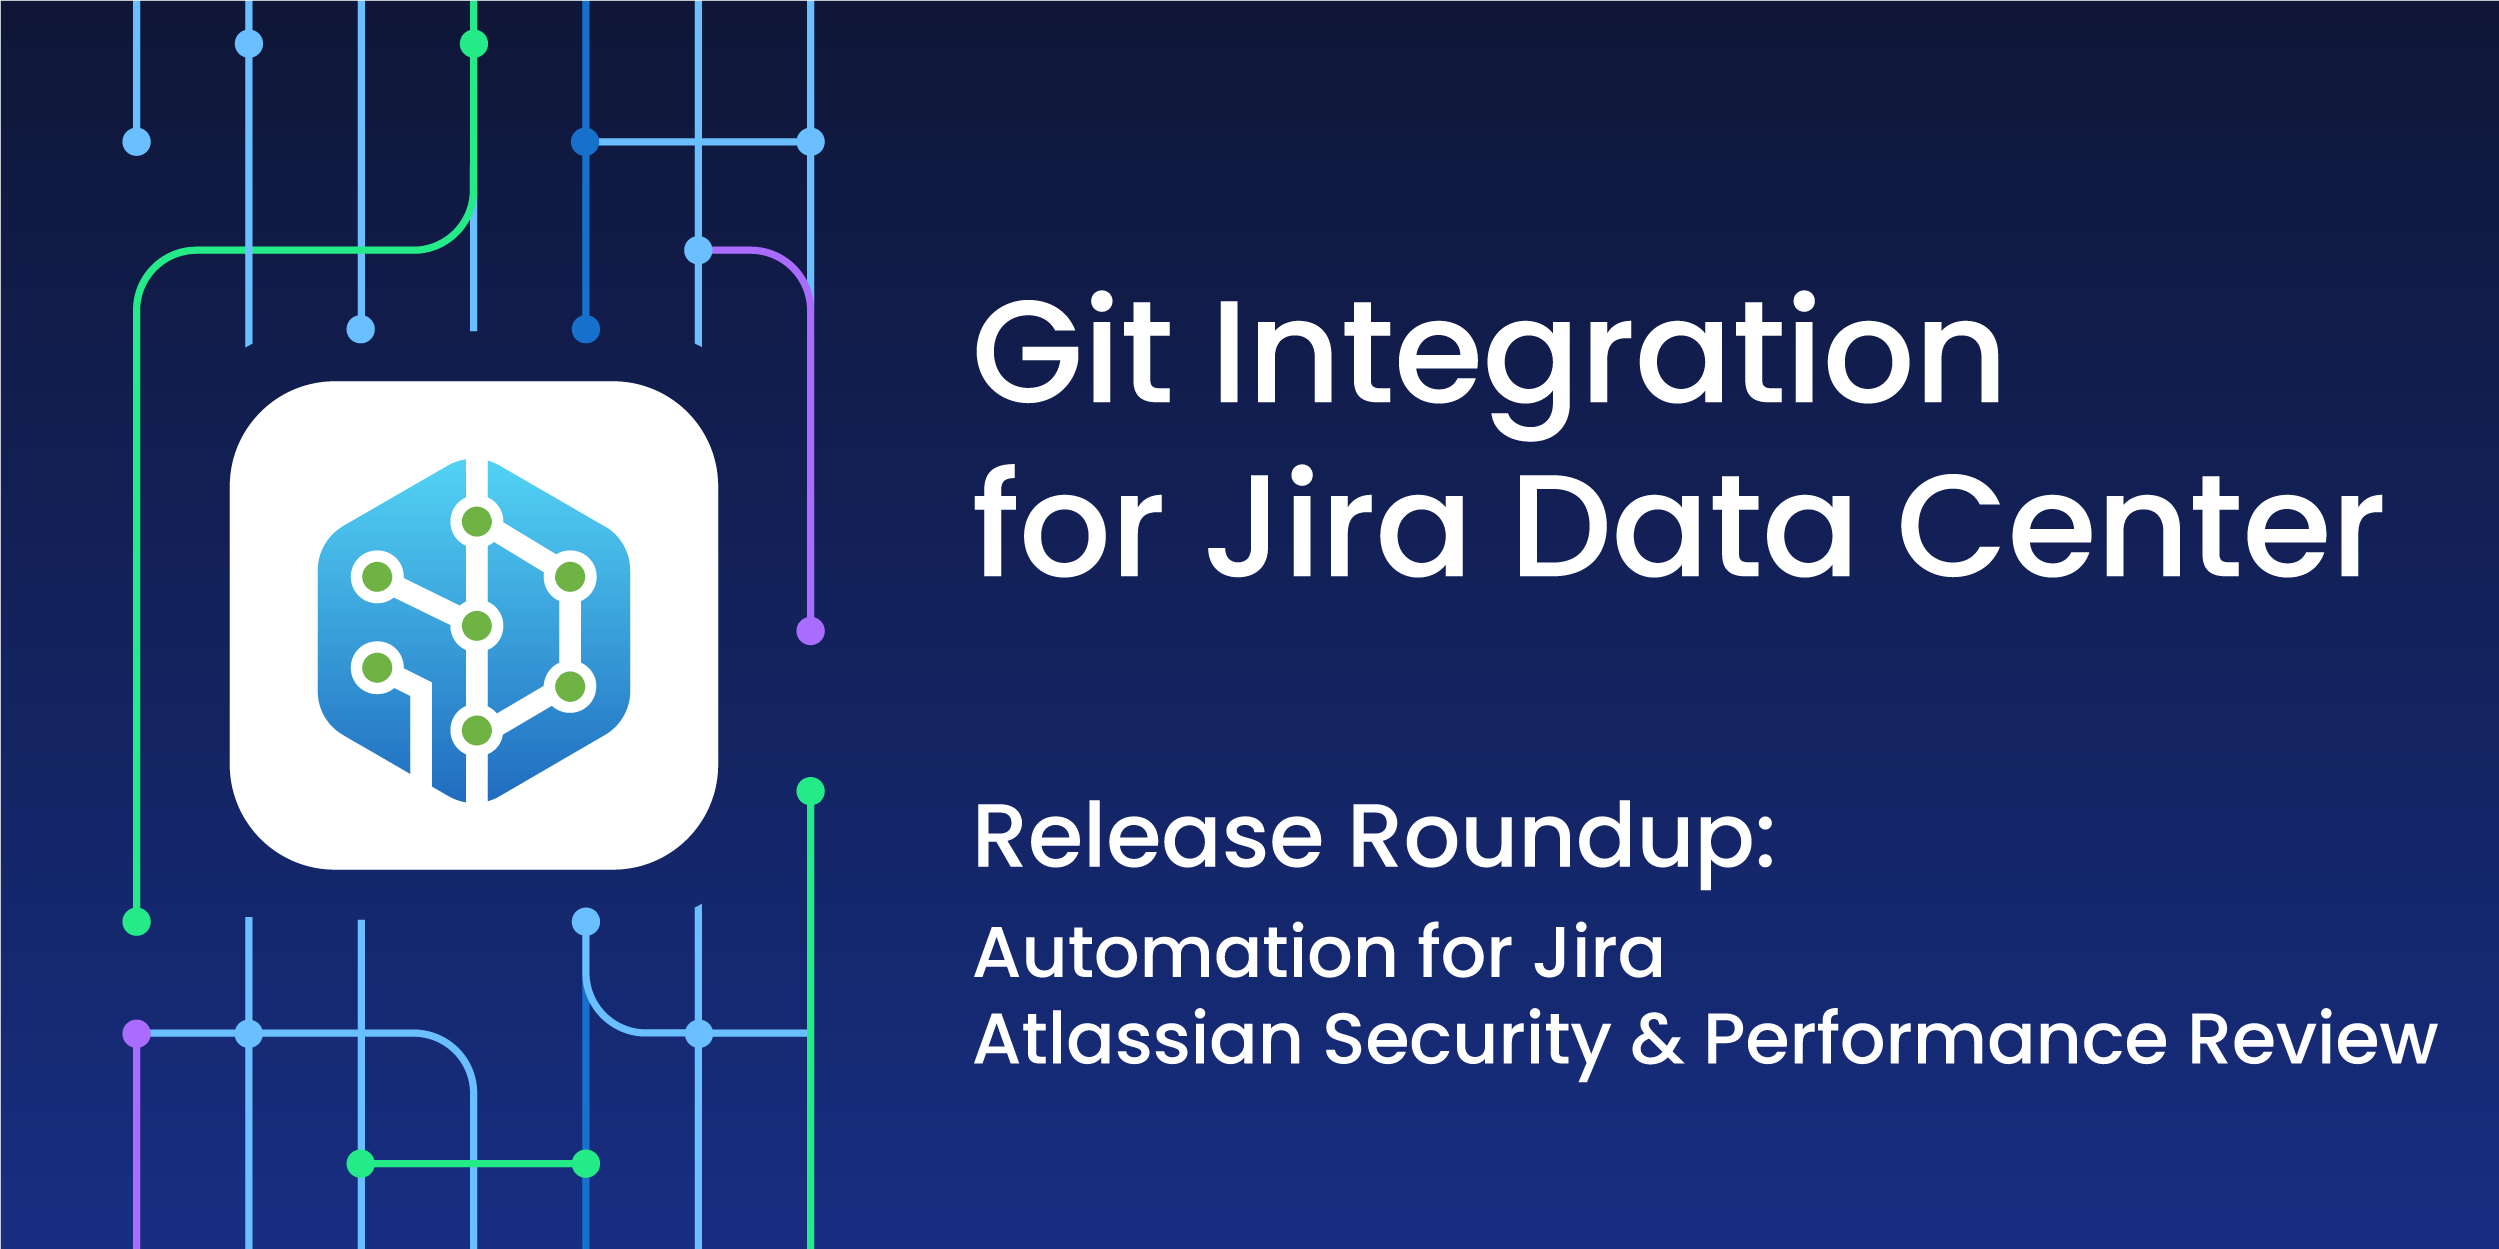 Git Integration for Jira Data Center Release: automation for Jira & Atlassian Security & Performance Review